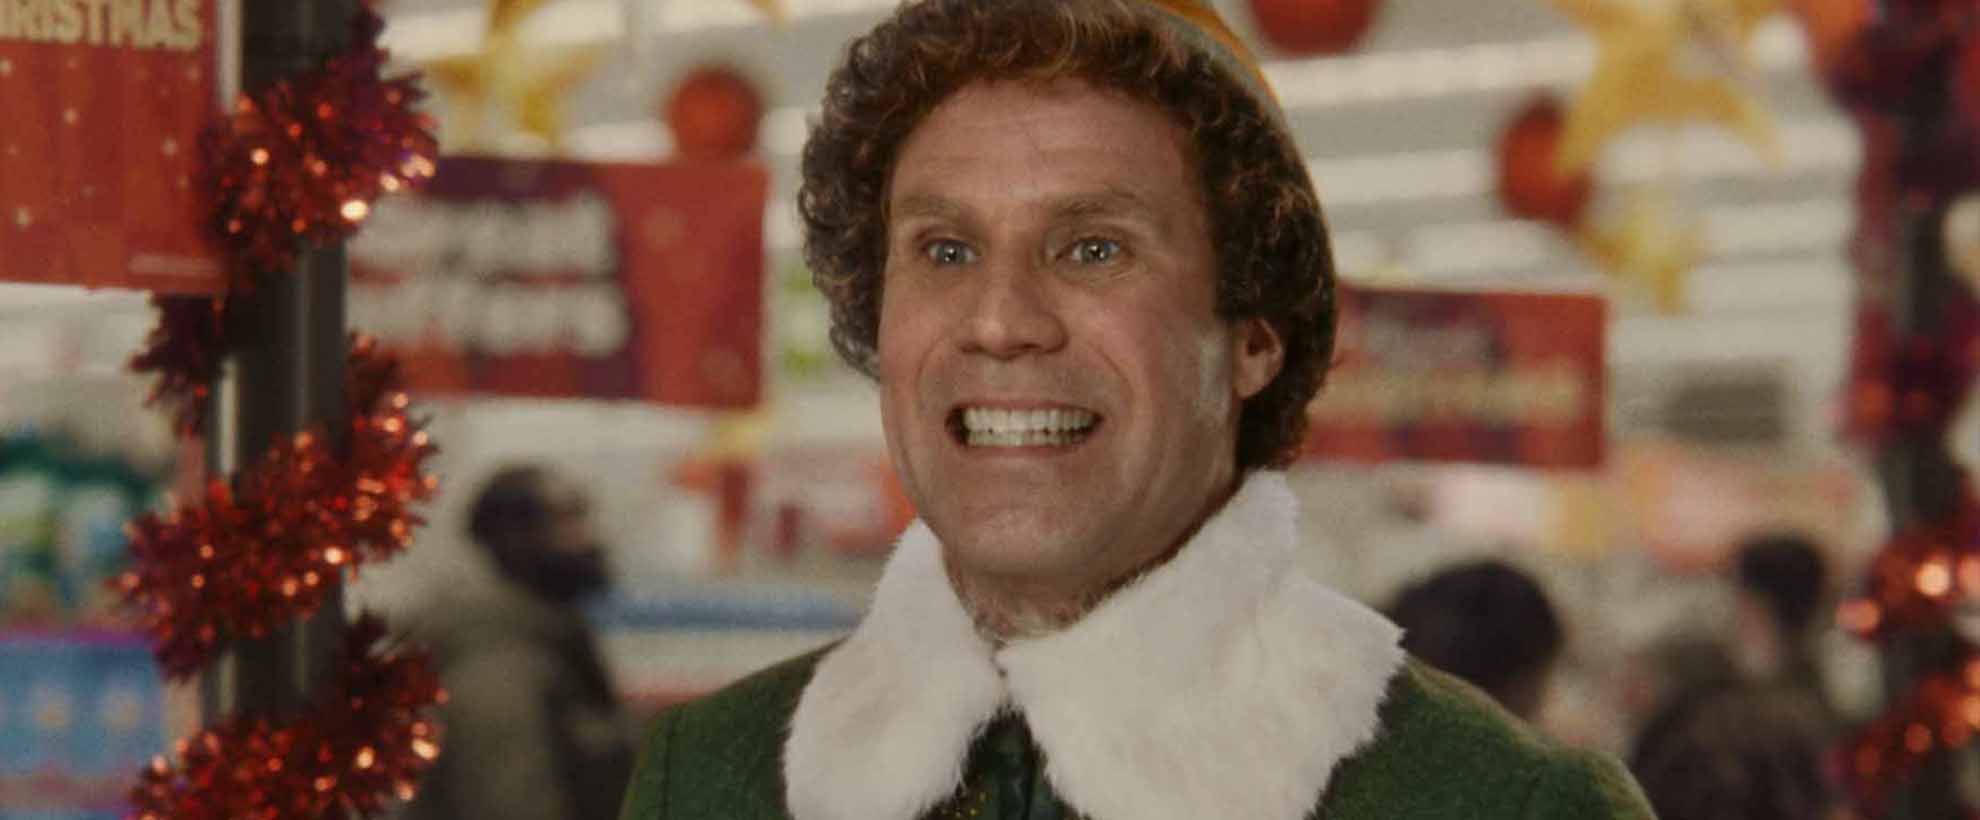 Will Ferrell as Buddy the Elf stands grinning